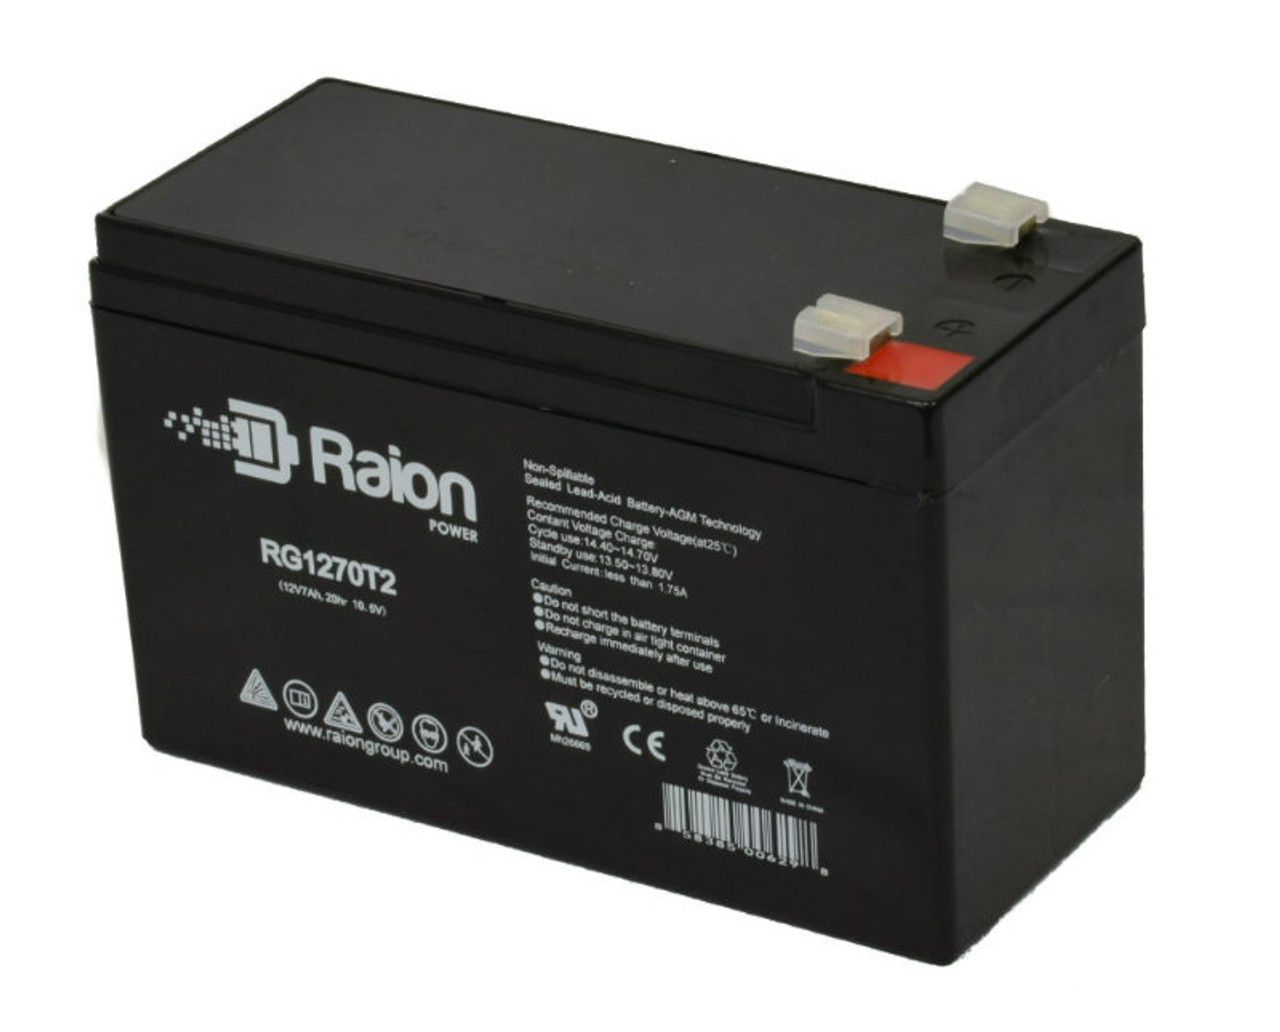 Raion Power Replacement 12V 7Ah Battery for Newmox FNC-1270 - 1 Pack